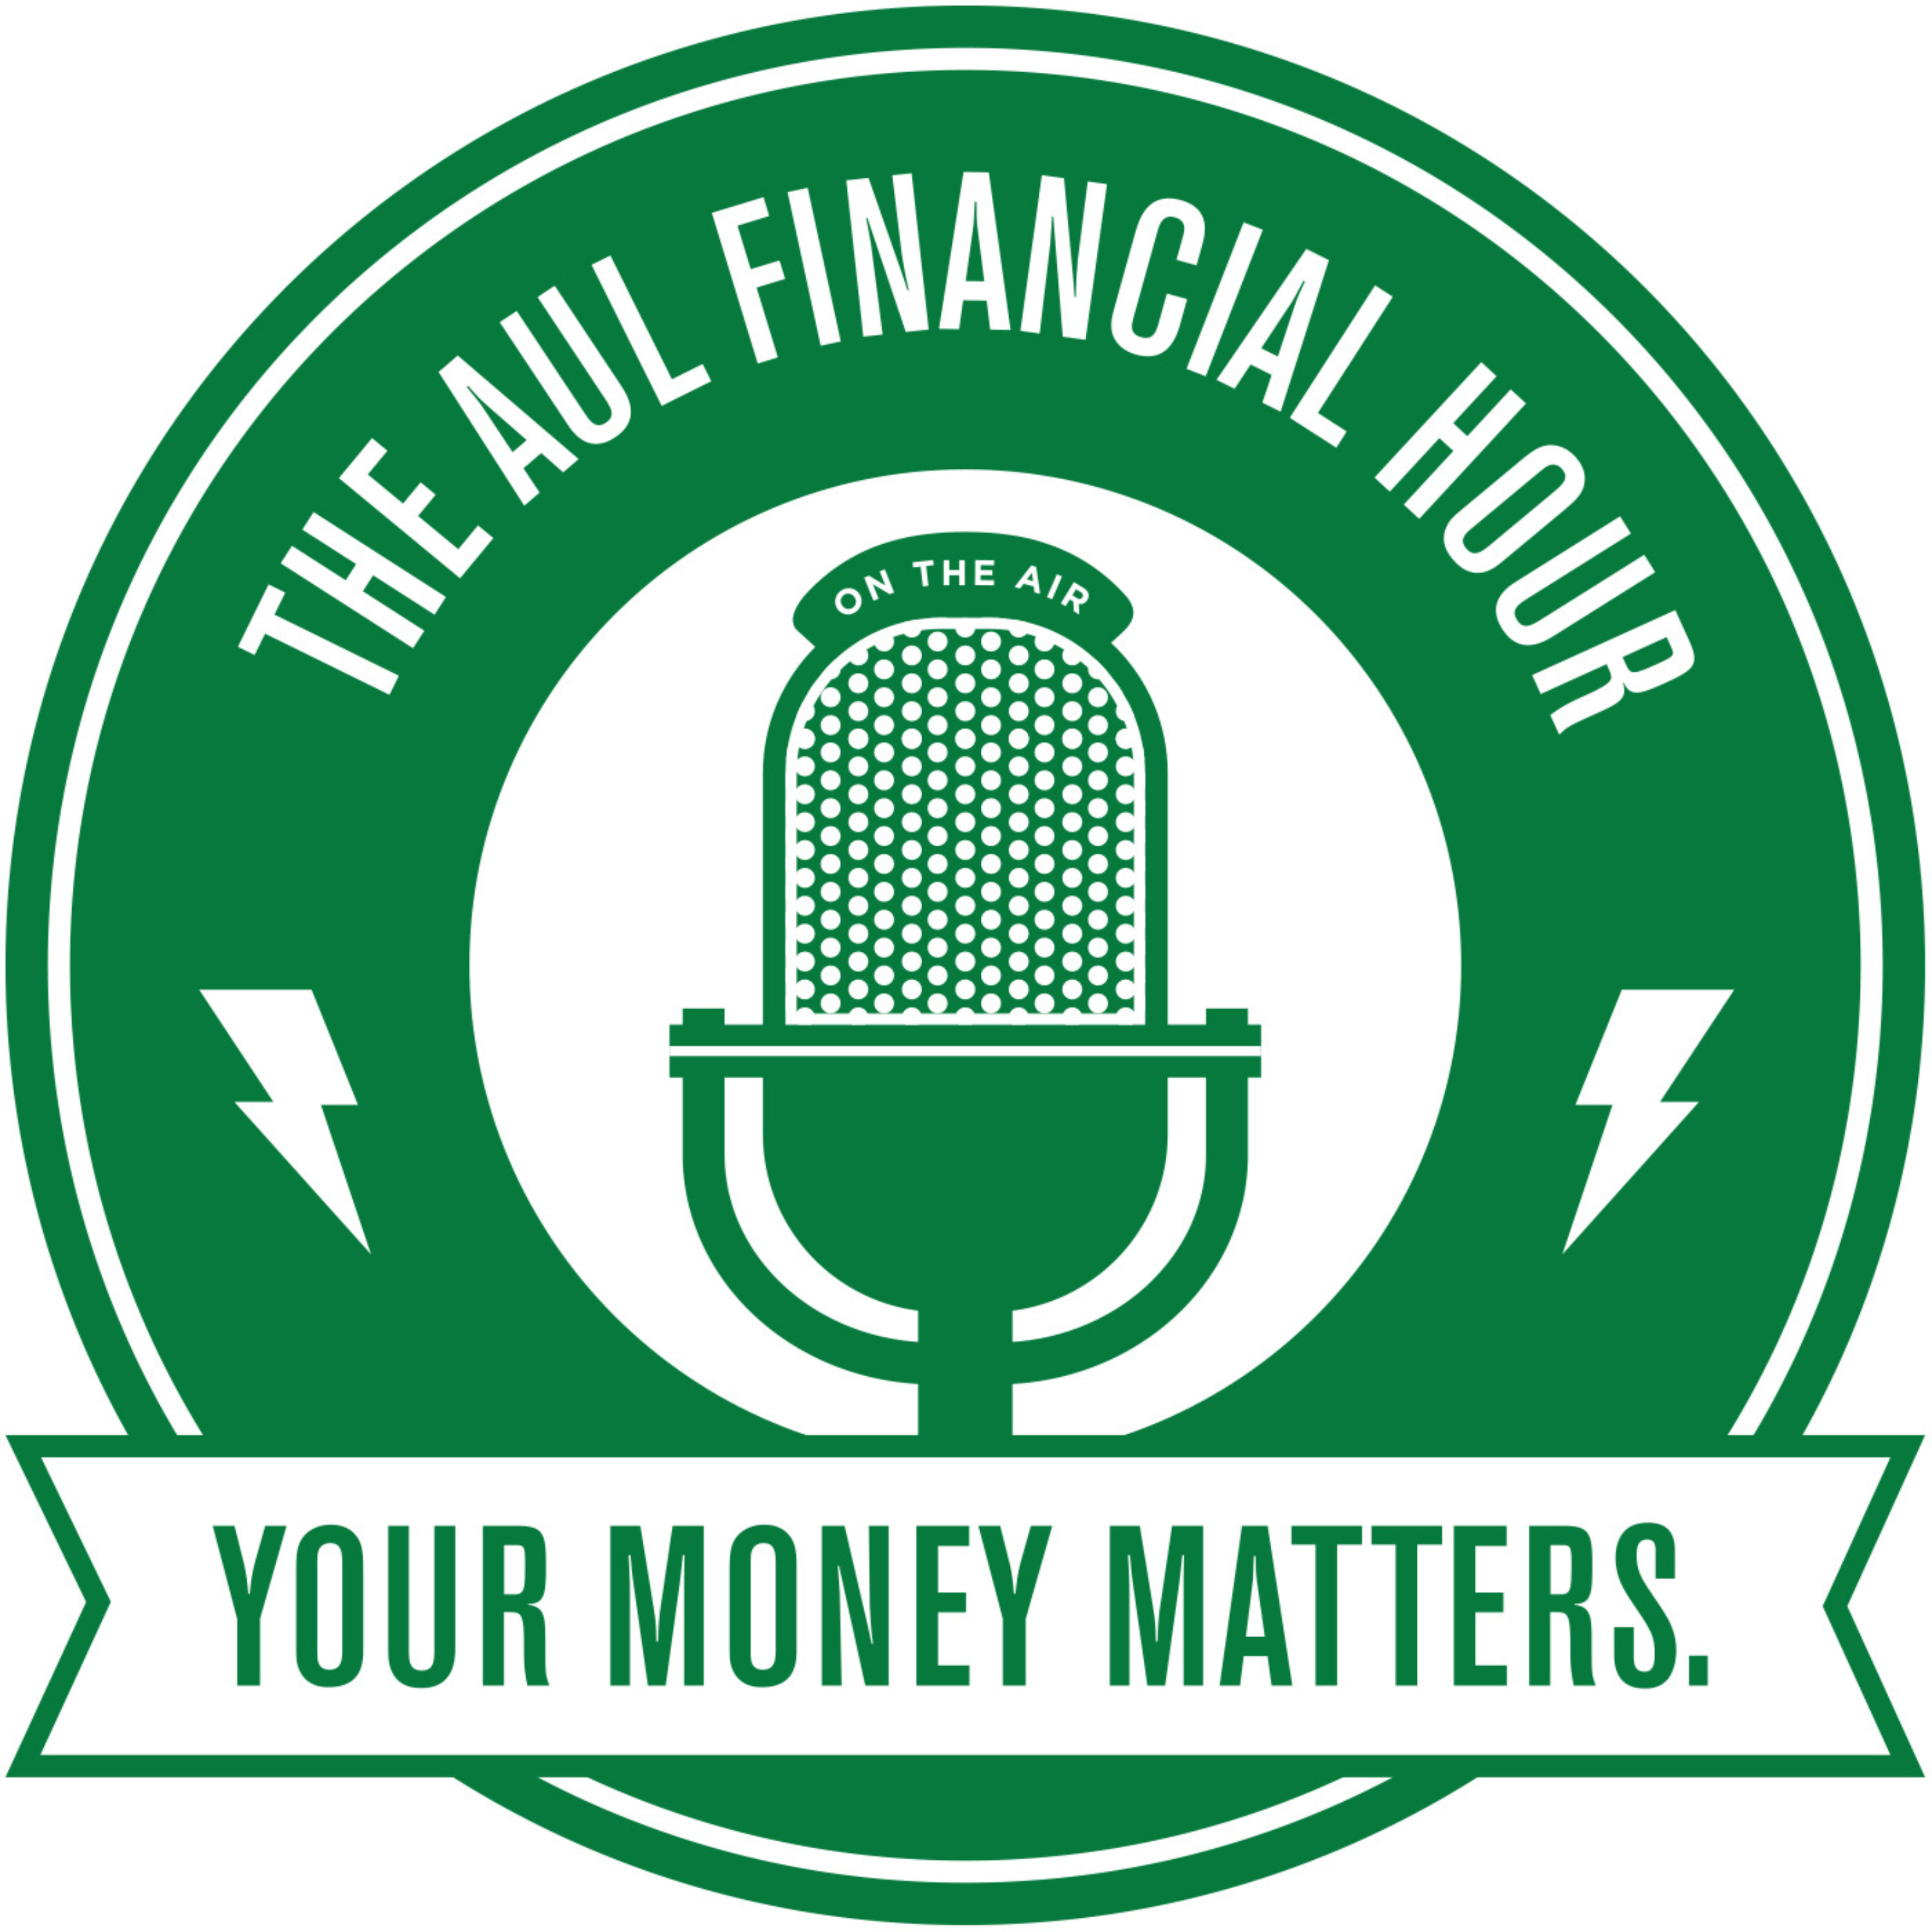 The Aul Financial Hour